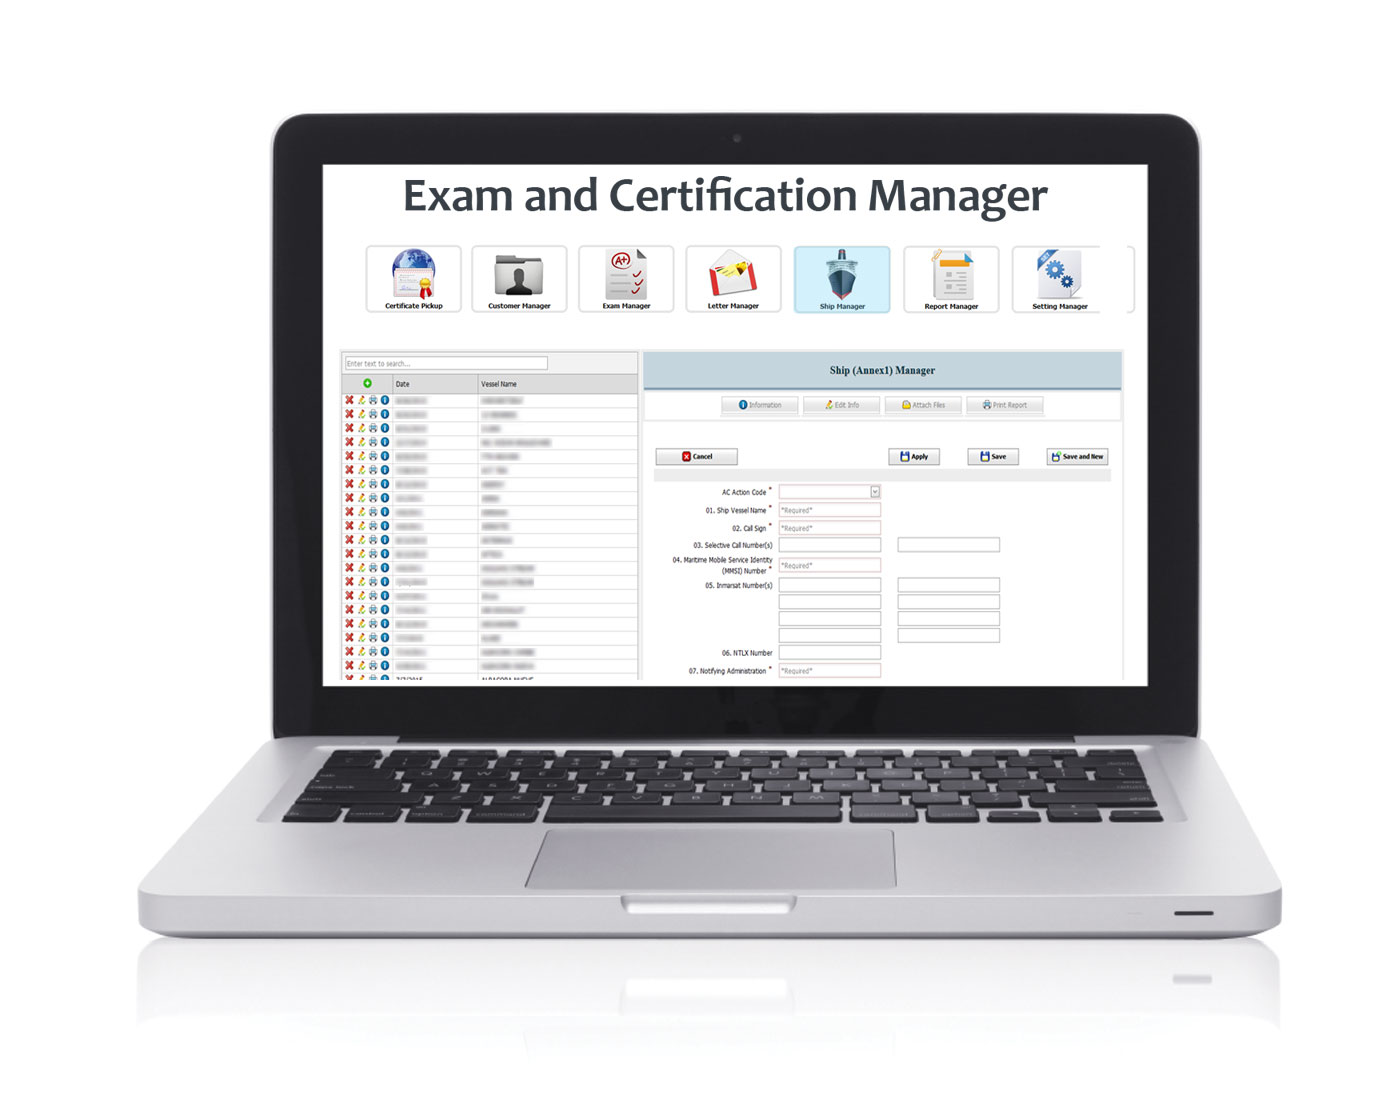 Exam and Certification Manager